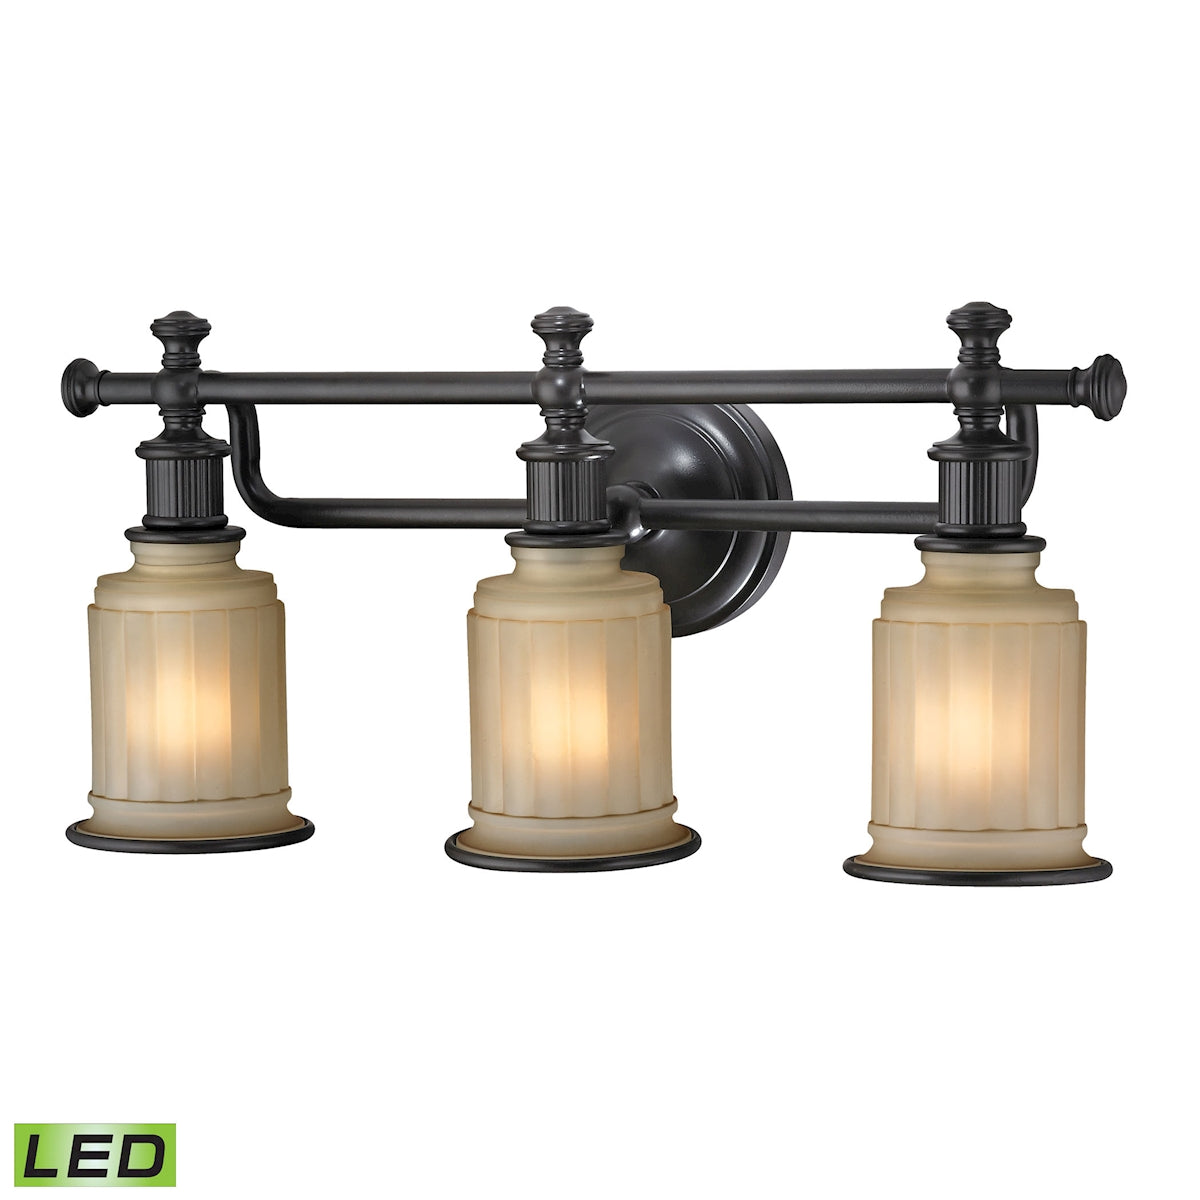 ELK Lighting 52012/3-LED Acadia 3-Light Vanity Lamp in Oiled Bronze with Opal Reeded Pressed Glass - Includes LED Bulbs